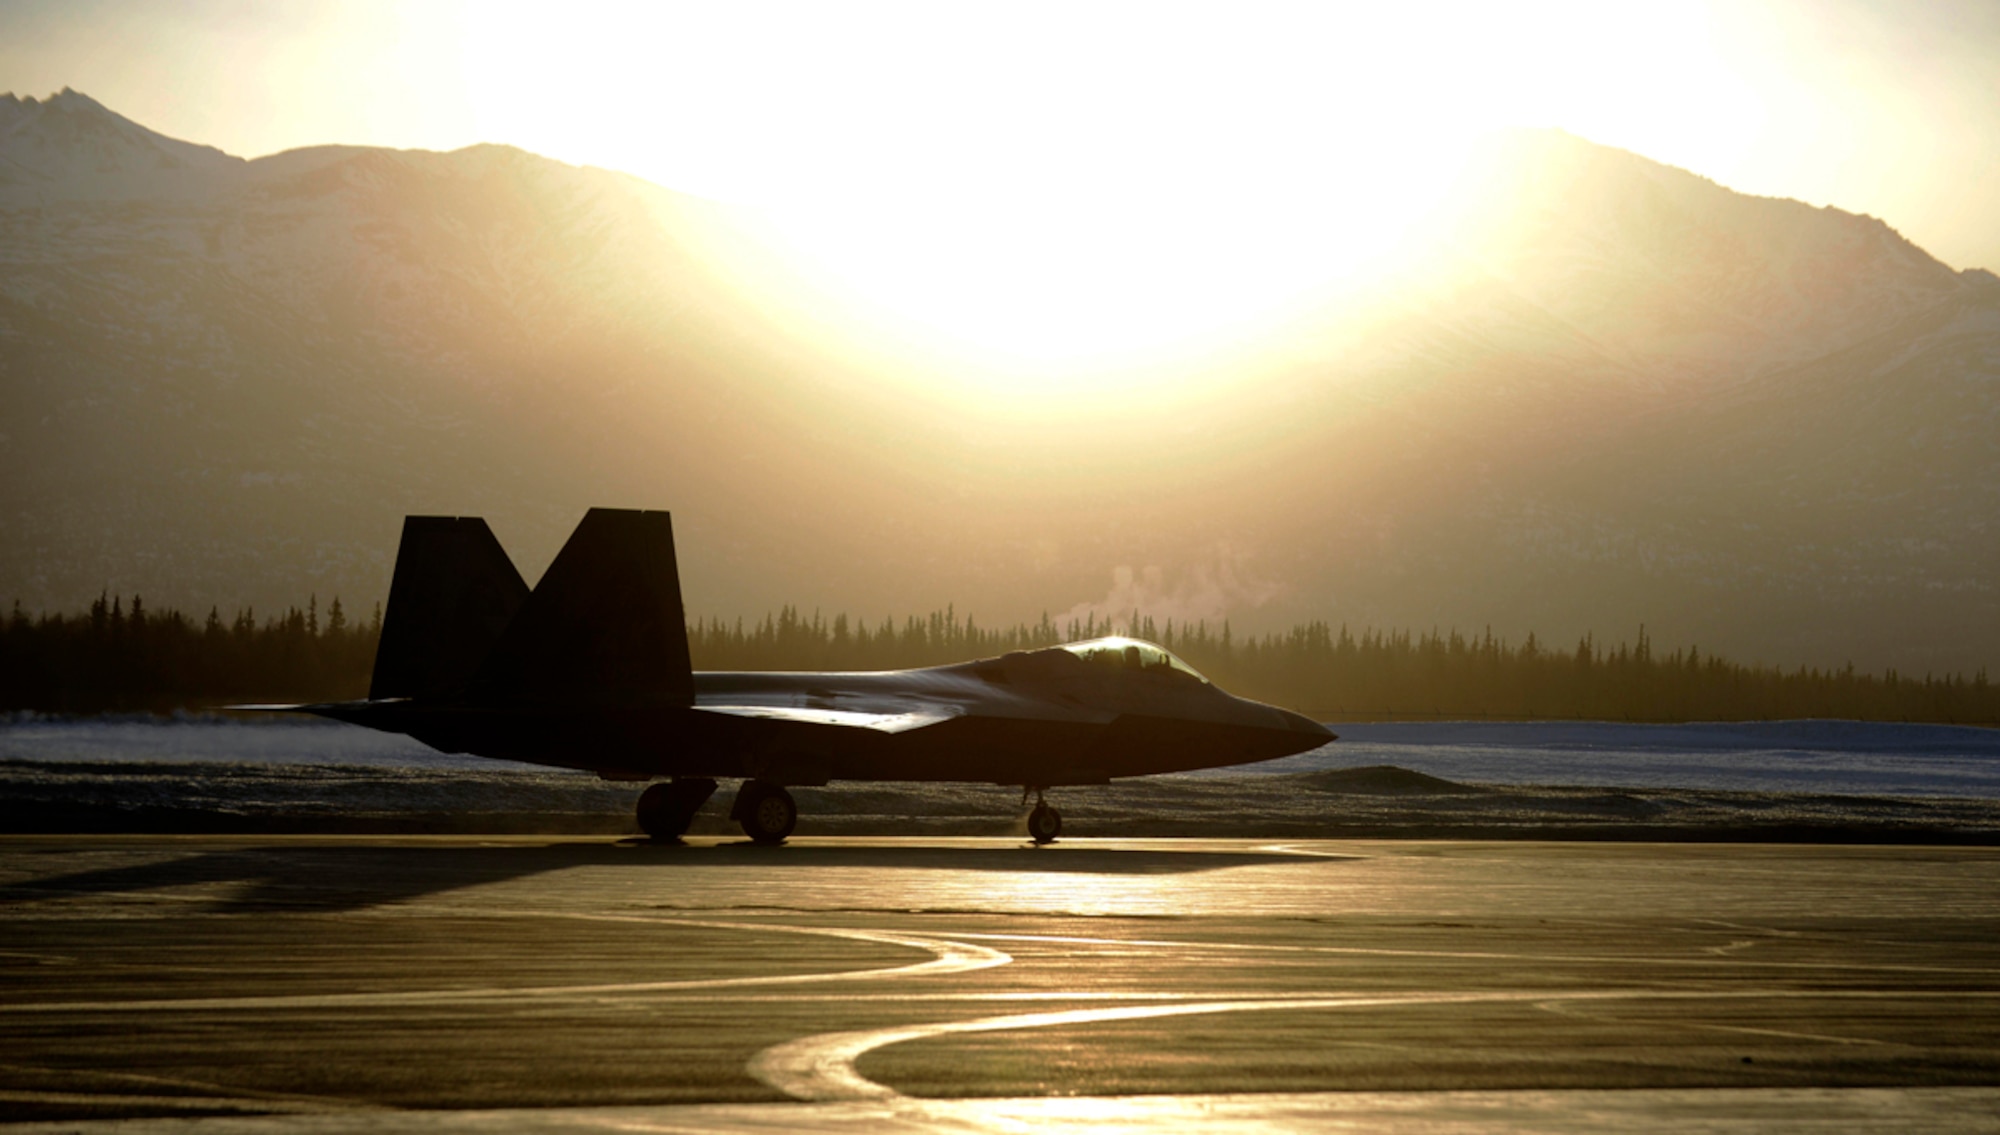 An F-22 Raptor assigned to the 90th Fighter Squadron taxis on the runway during Exercise Polar Force 14-2 on Joint Base Elmendorf-Richardson, Alaska, Feb. 10, 2014. The exercise is designed to validate JBER’s ability to integrate, mobilize and prepare assigned personnel, aircraft and equipment for a wartime mission. (U.S. Air Force photo/Staff Sgt. Sheila deVera)